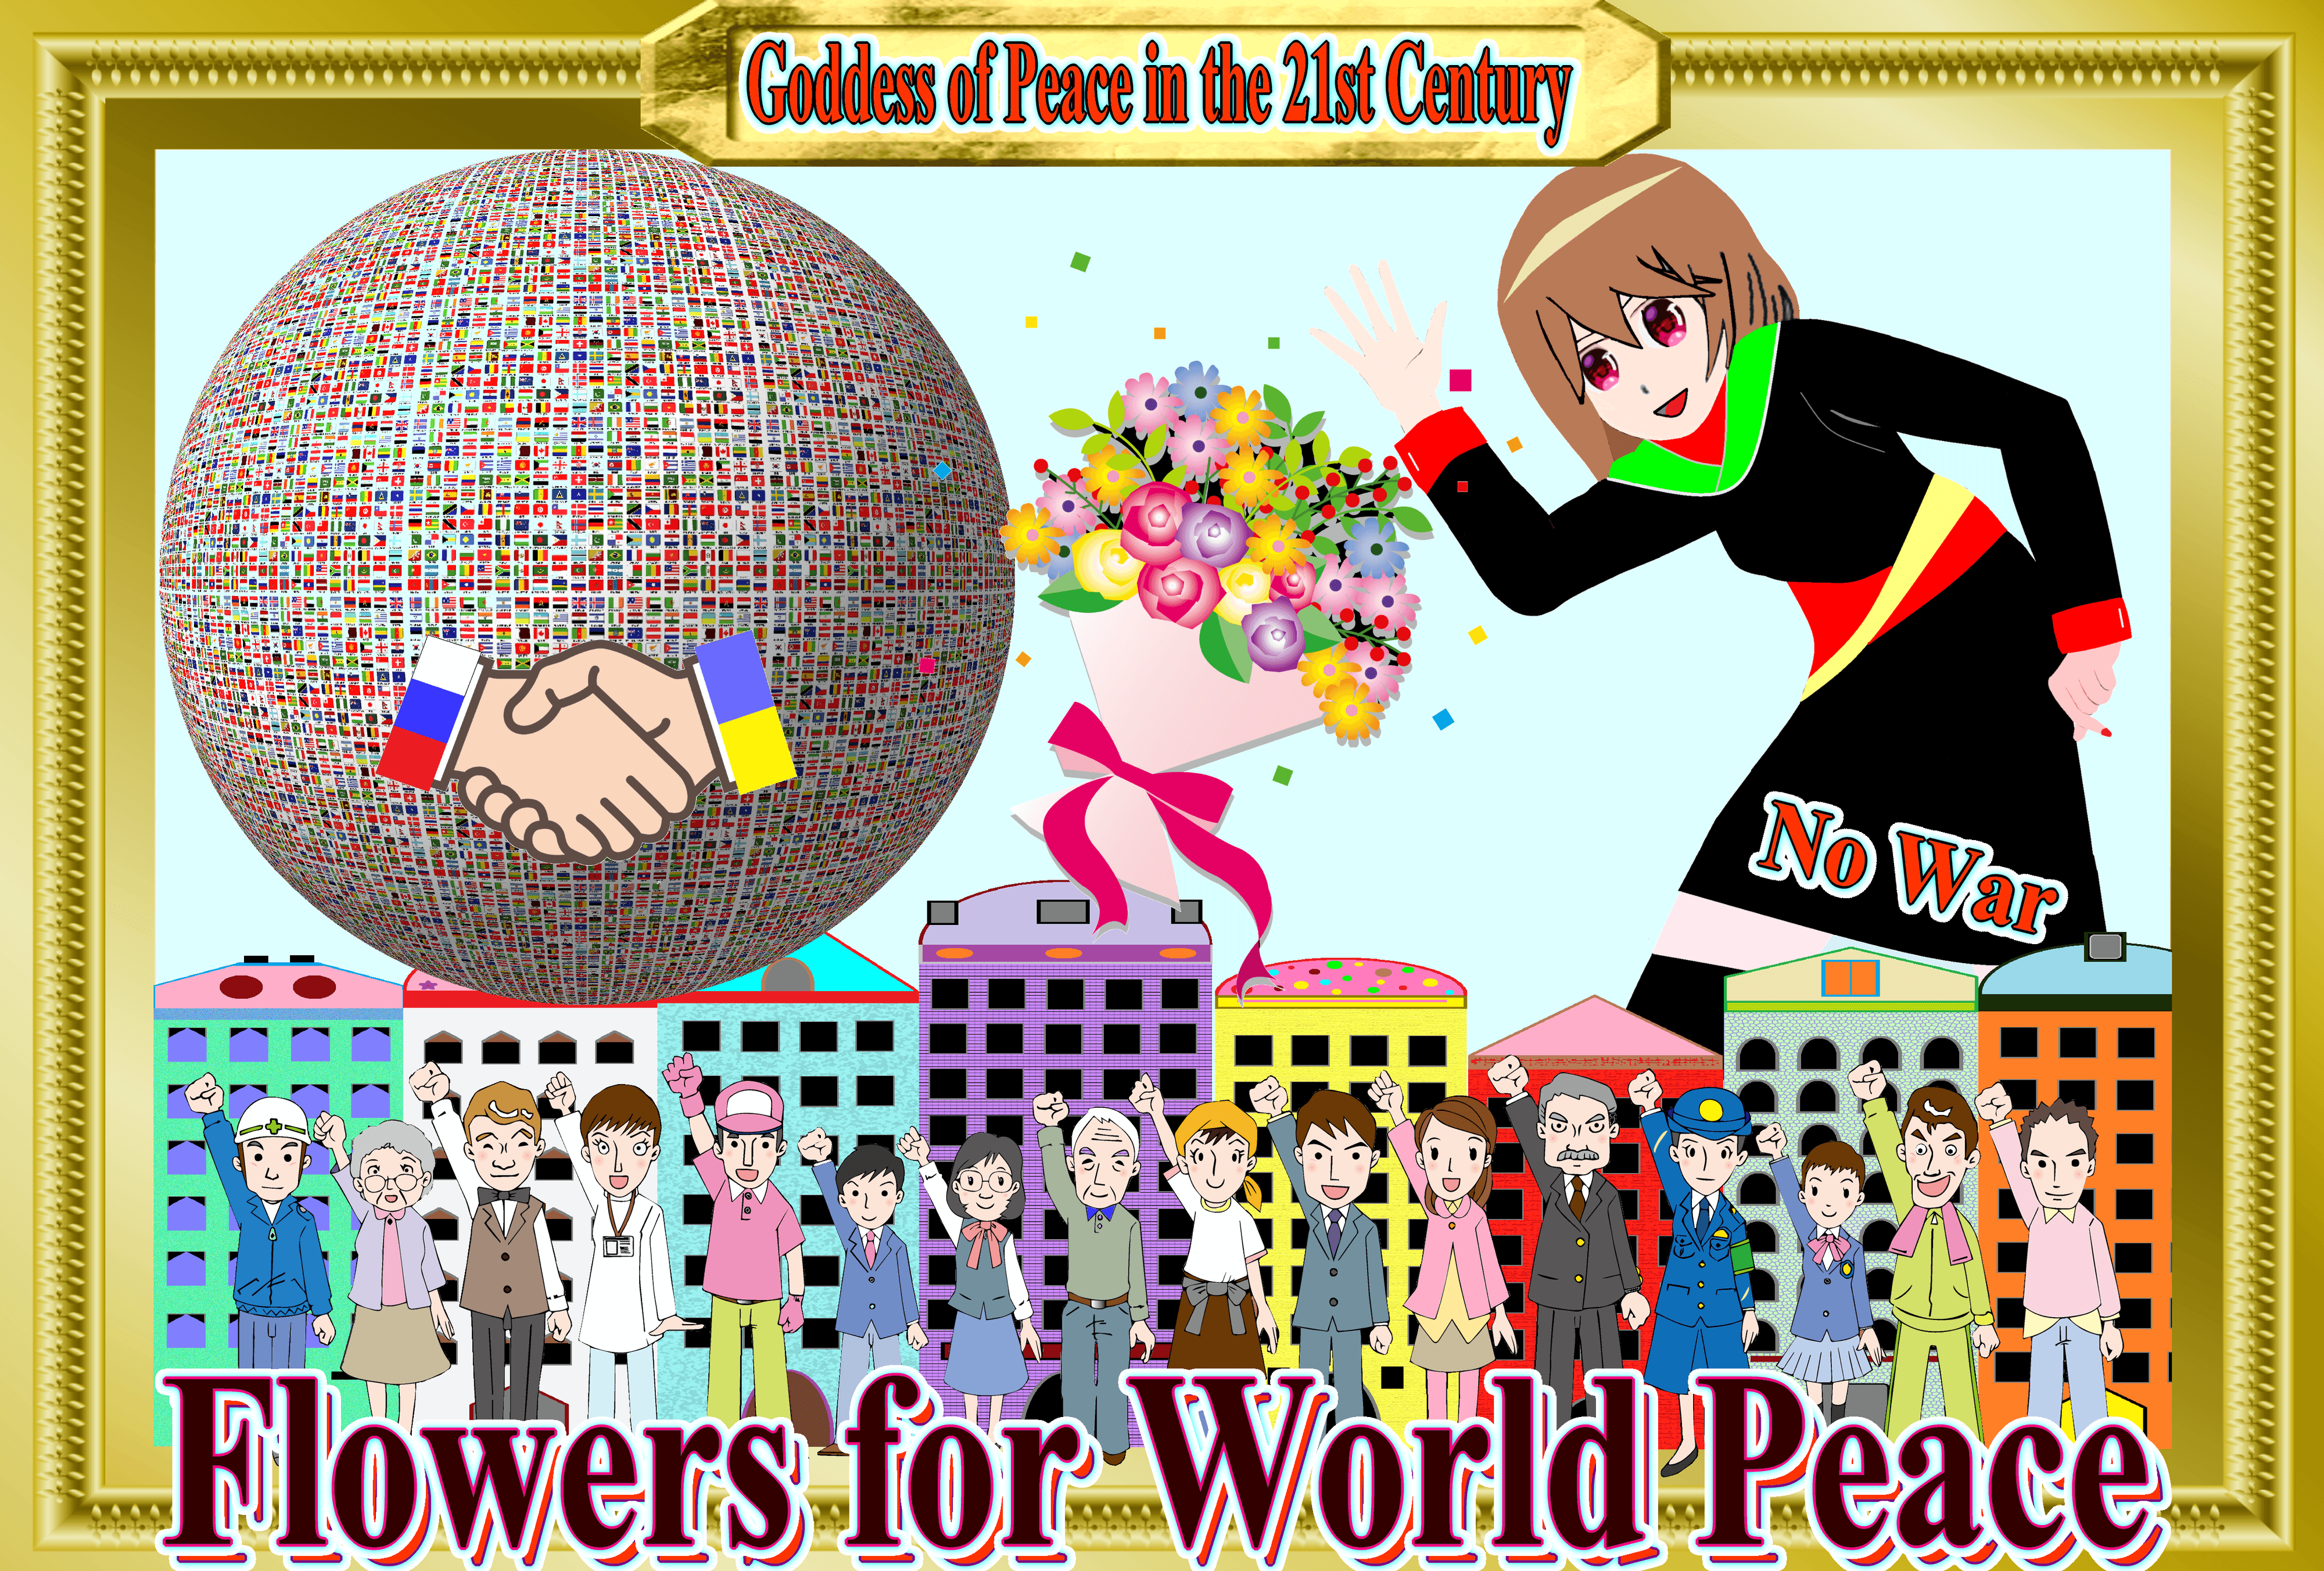 Flowers for World Peace ２： Goddess of Peace in the 21st Century